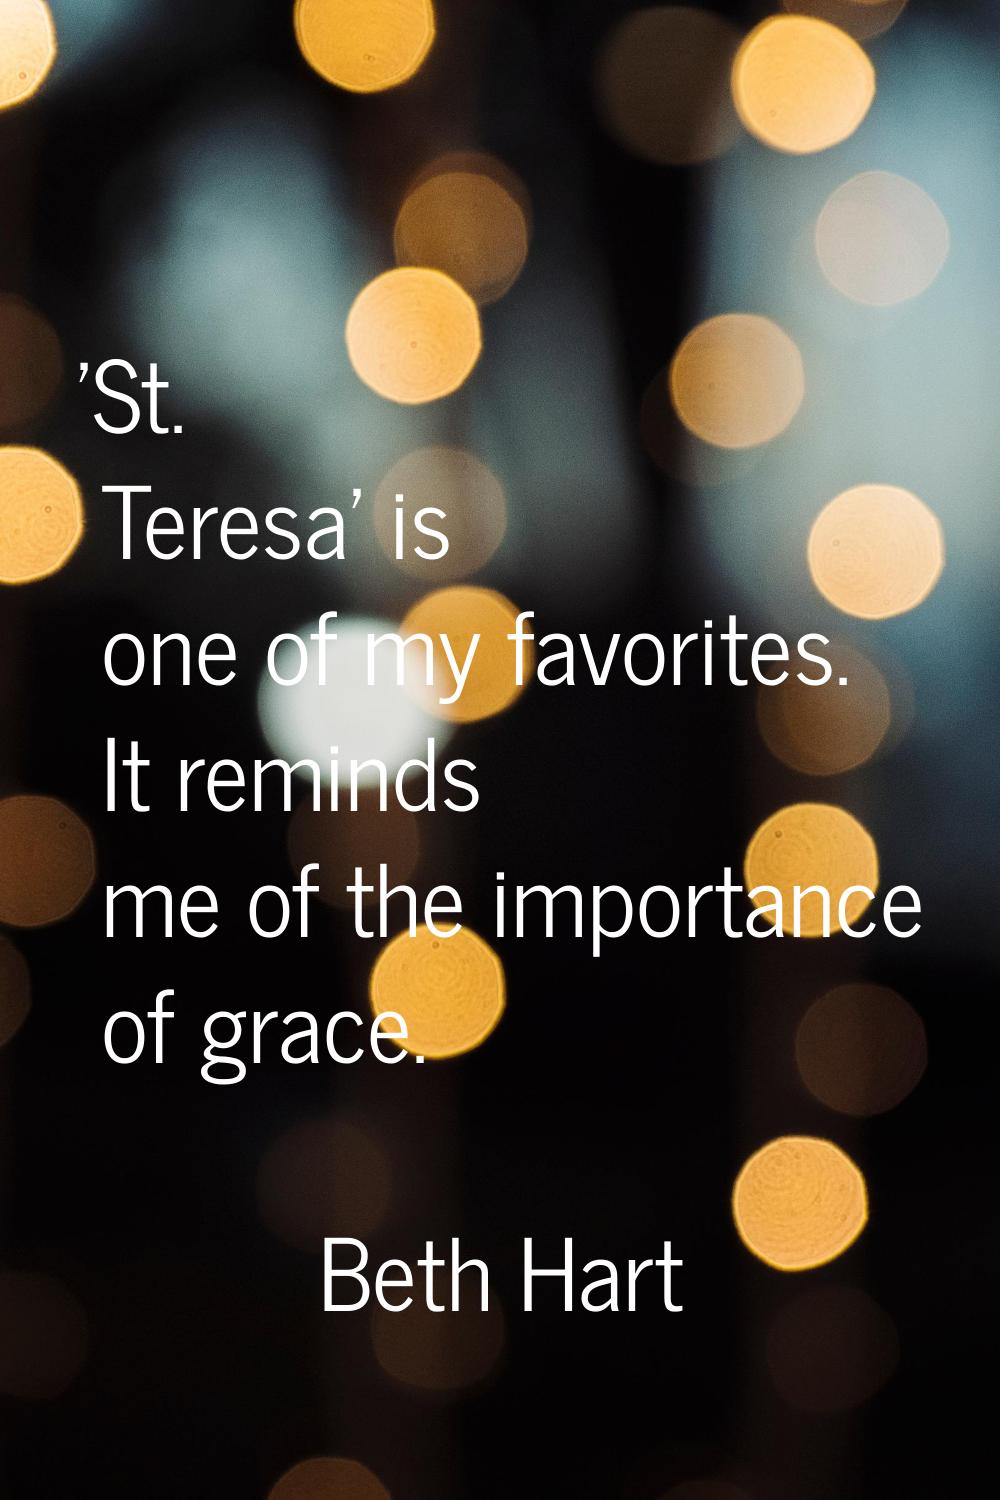 'St. Teresa' is one of my favorites. It reminds me of the importance of grace.